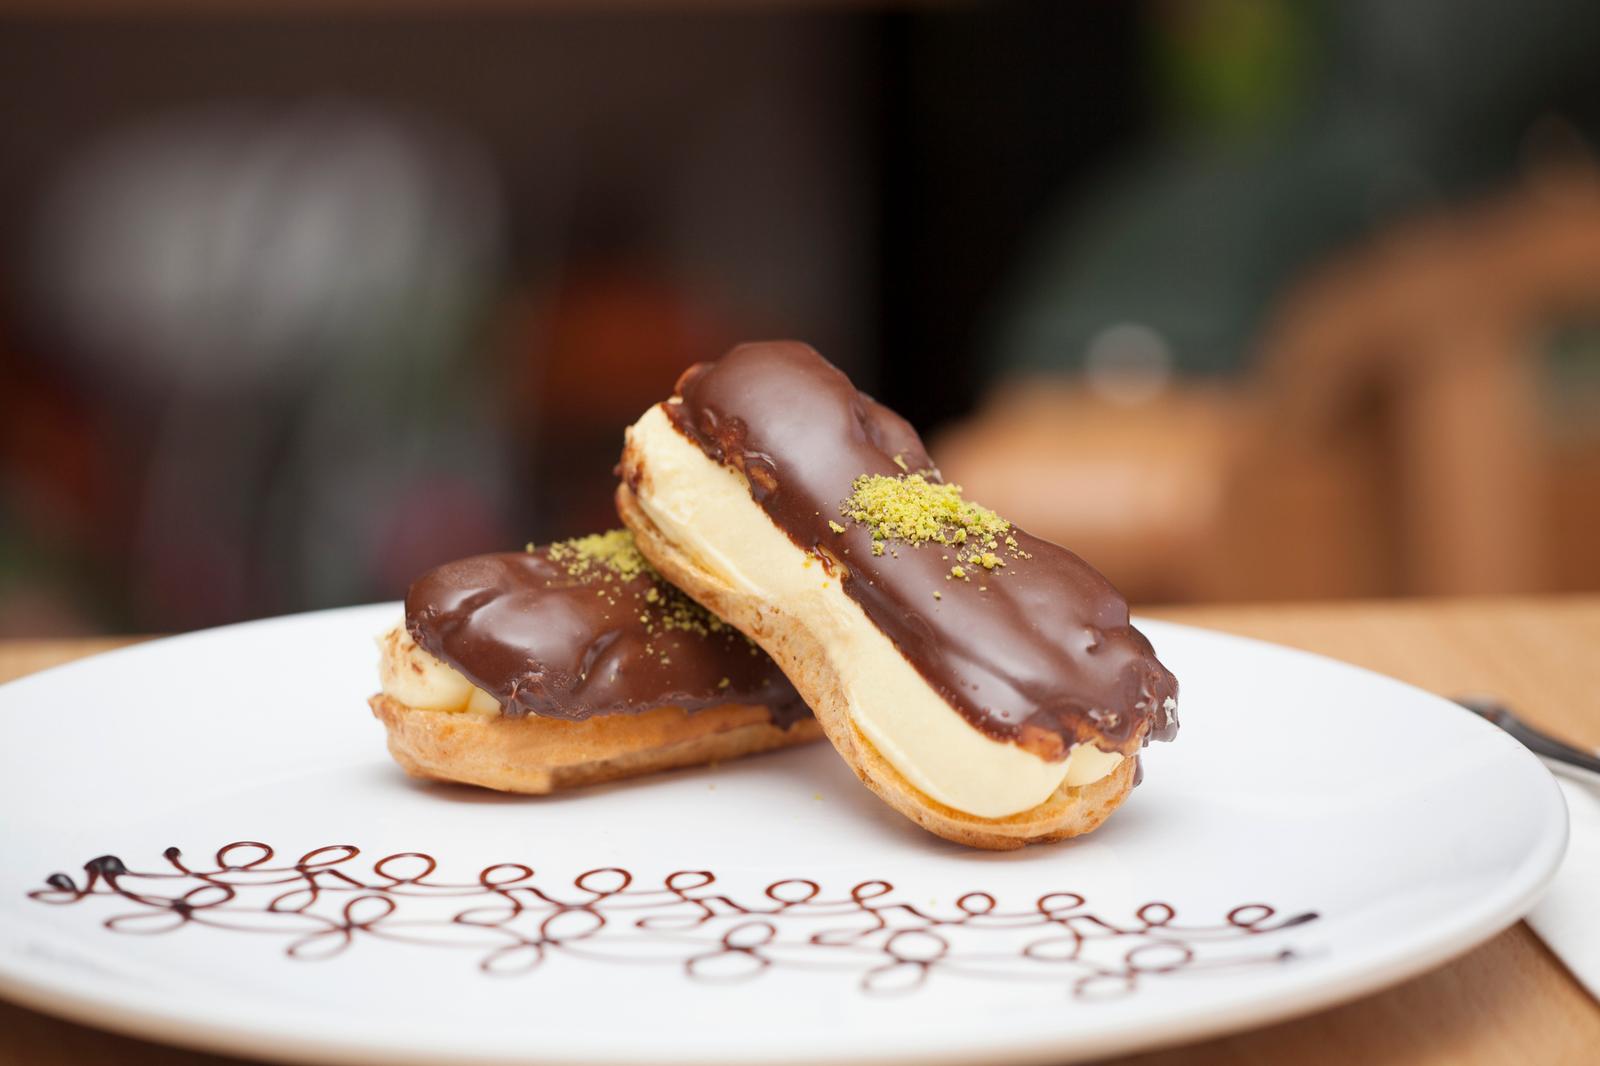 Are You A Food Snob Or A Food Slob? Desserts Quiz Chocolate eclair